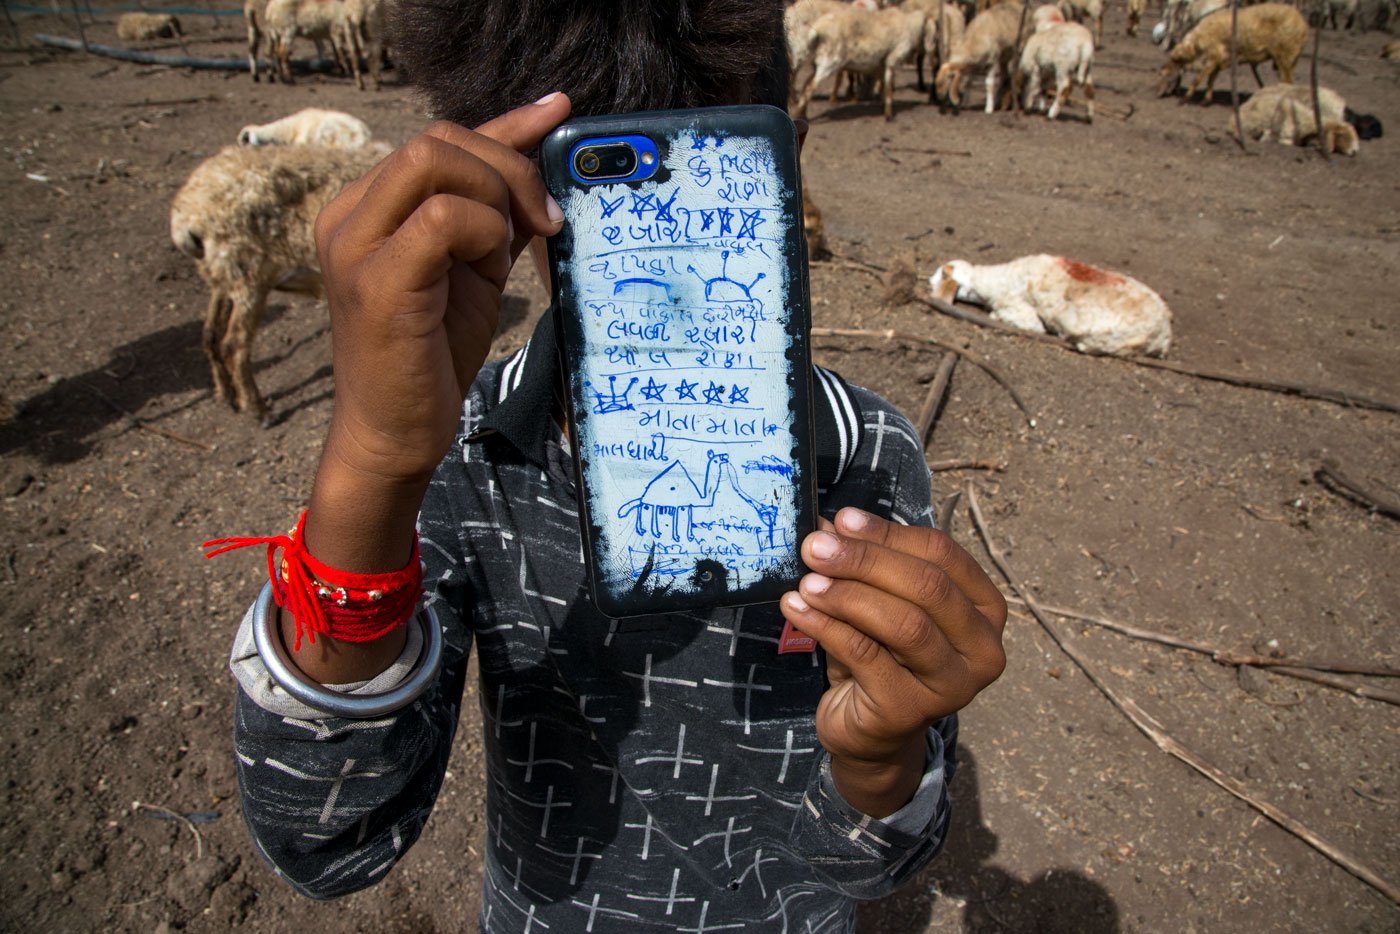 A maldhari child holds up a smartphone to take photos; the back is decorated with his doodles